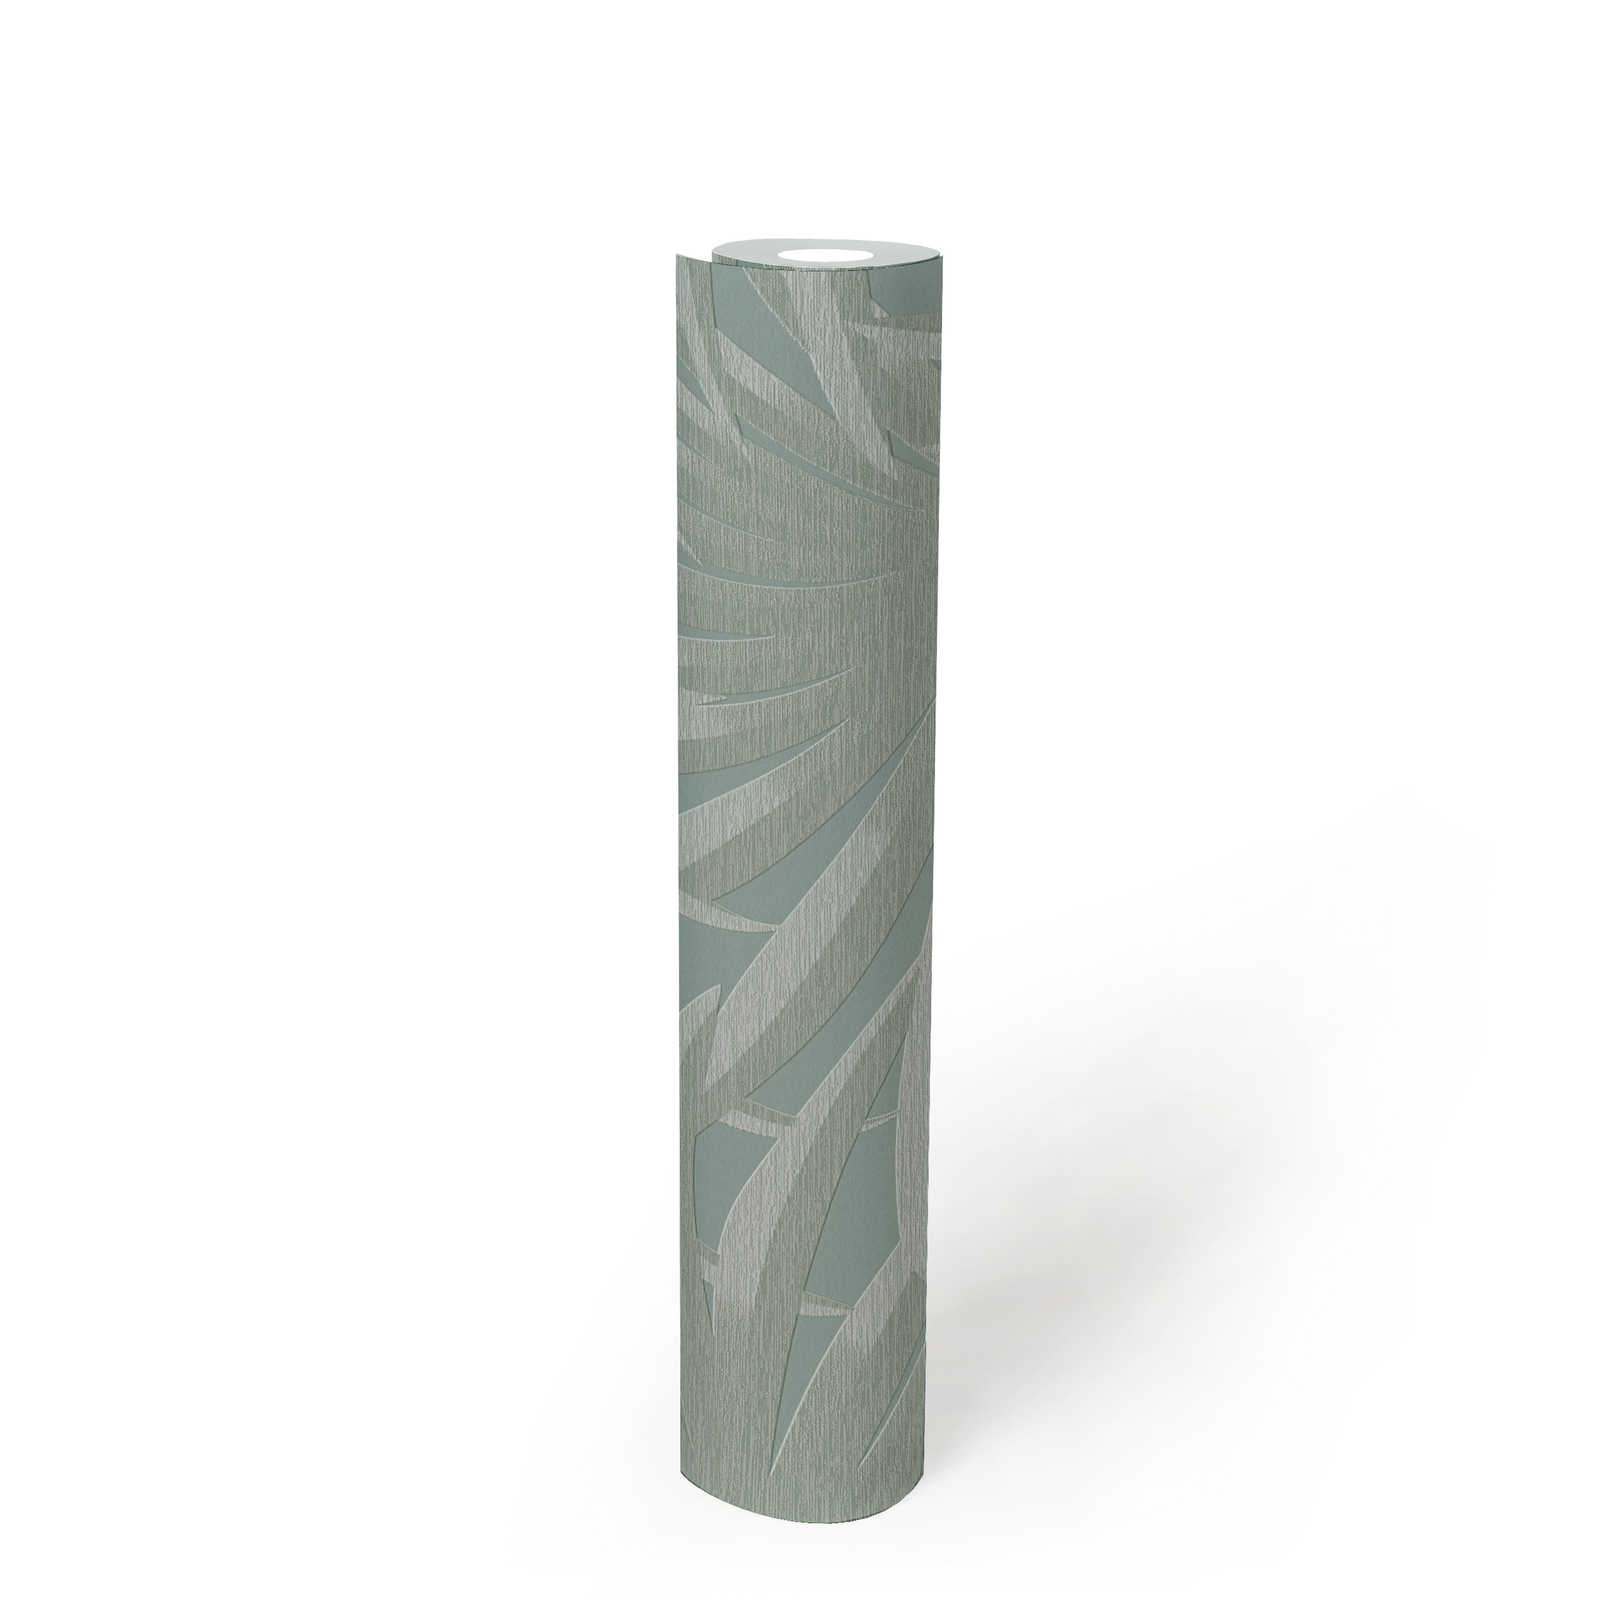             Patterned non-woven wallpaper jungle leaves - mint
        